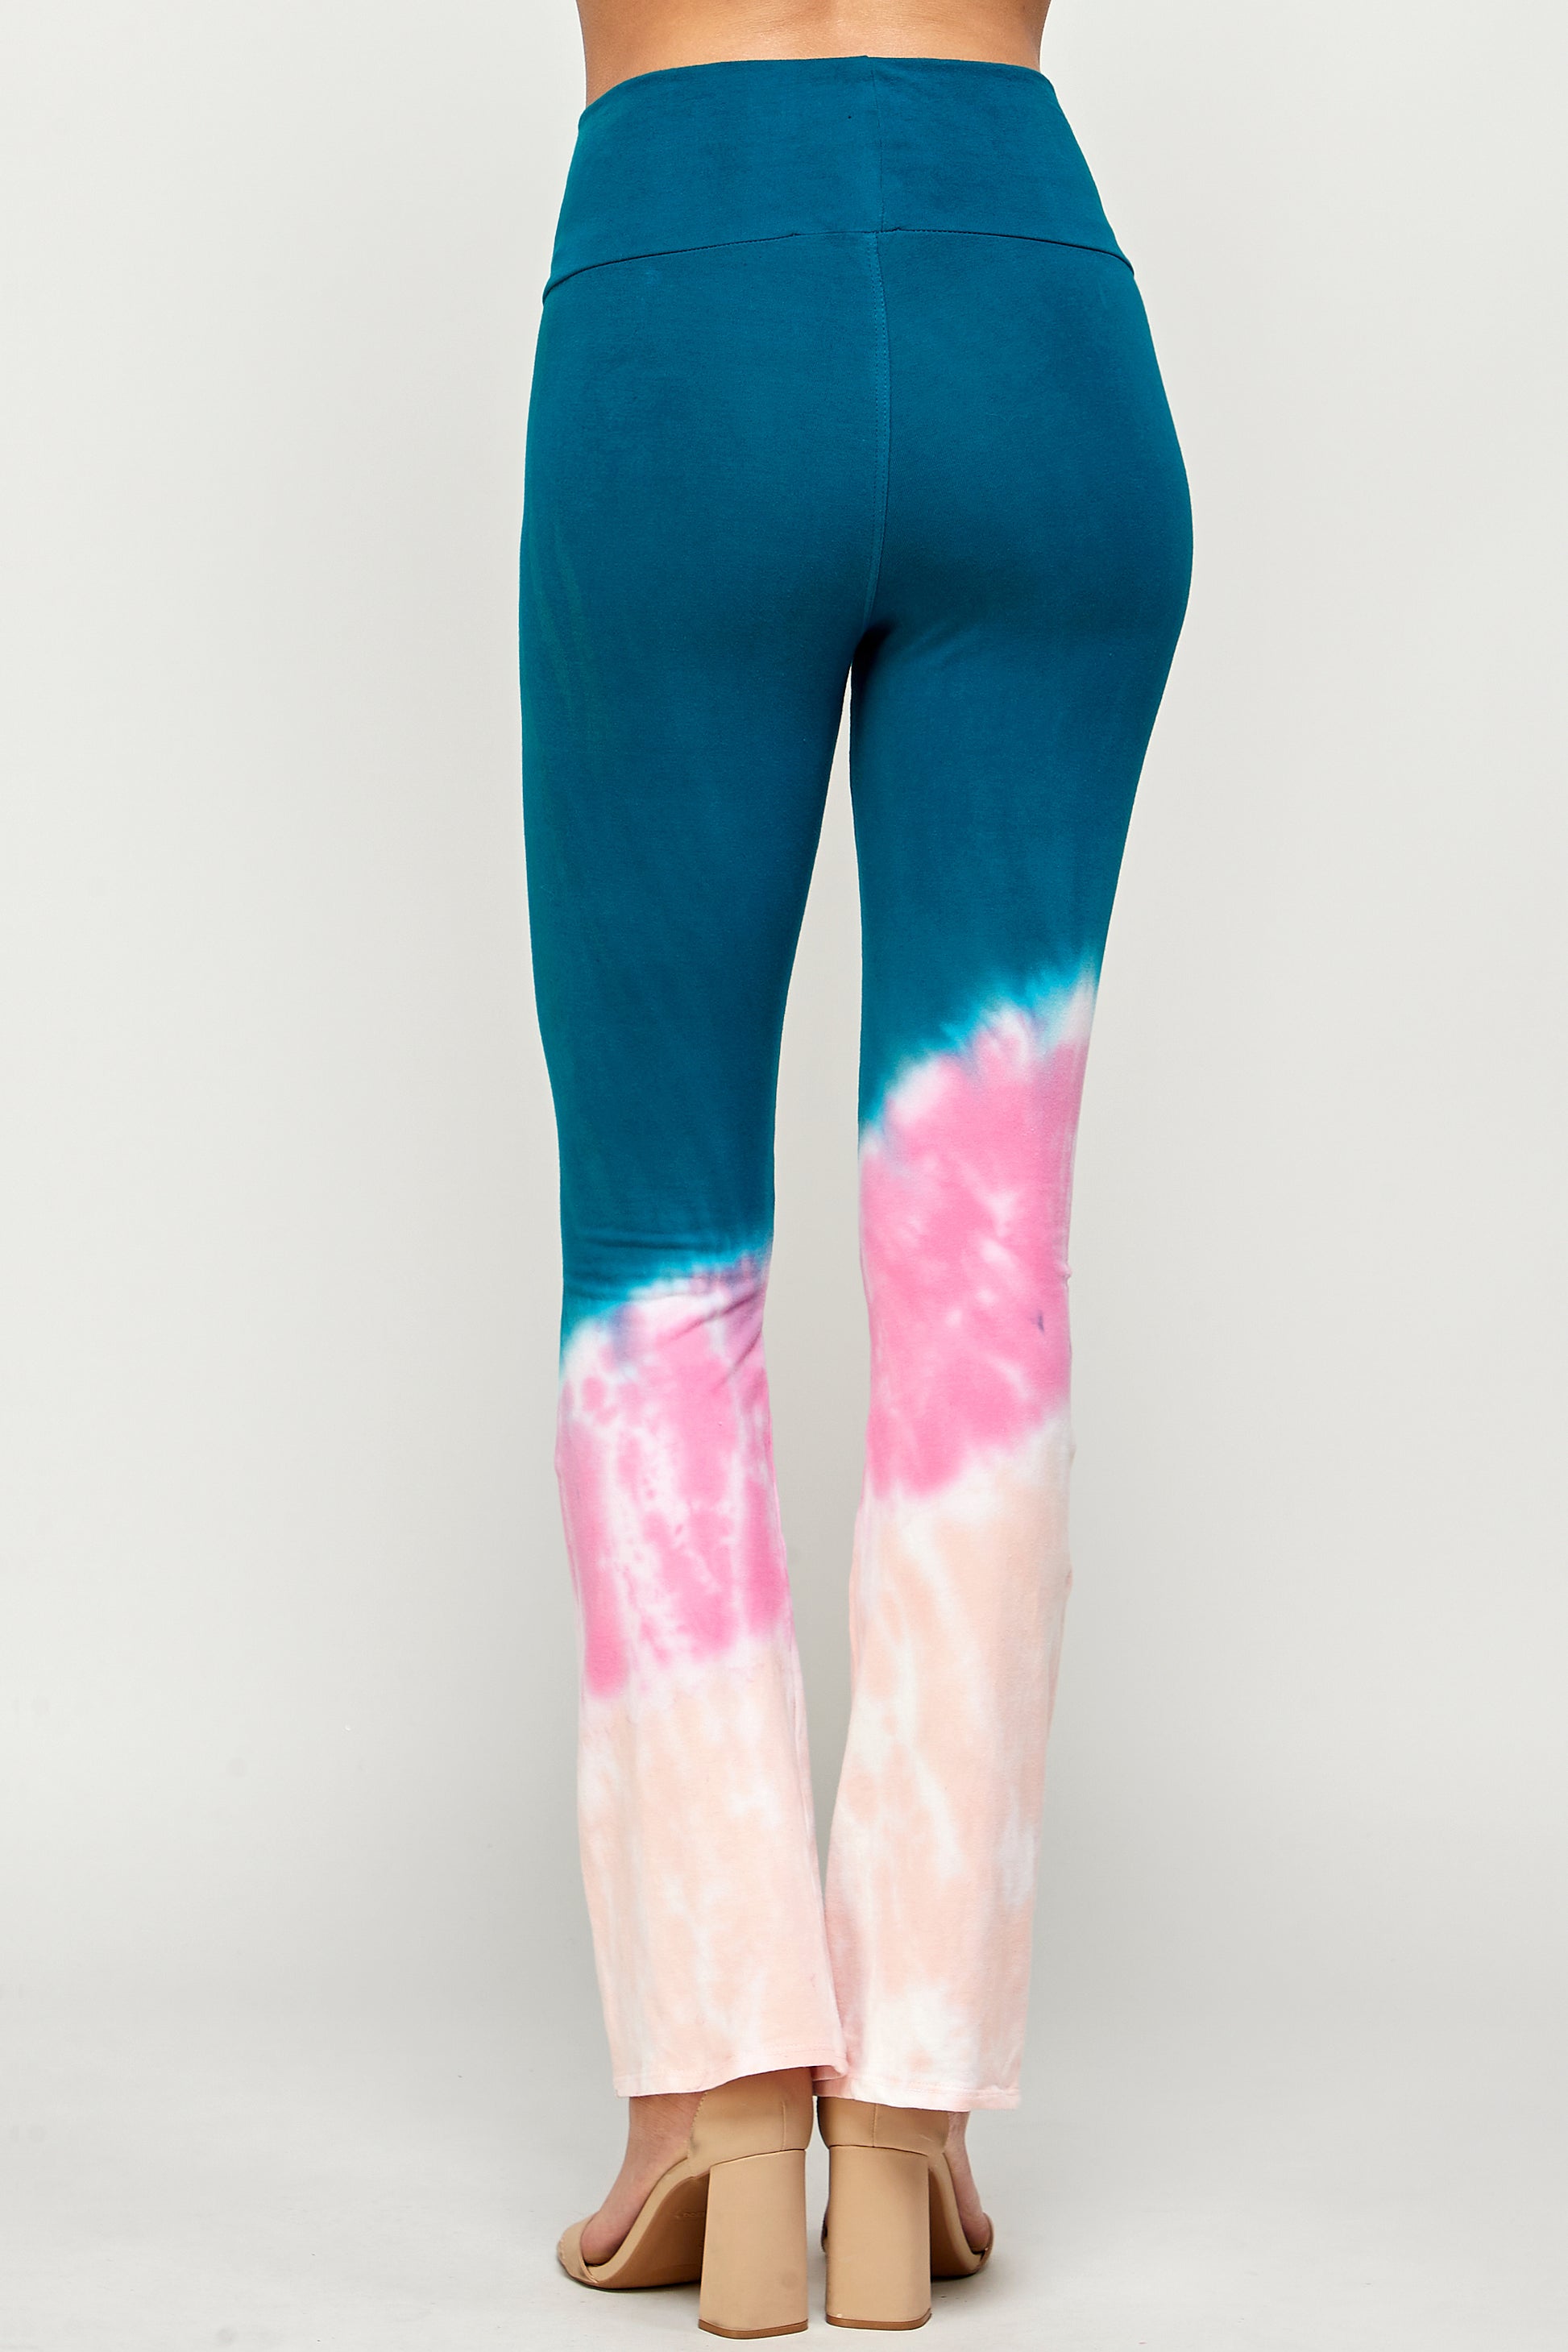 Women's Dip Dye Ombre Athletic Leggings with High Waistband -Periwinkle, M